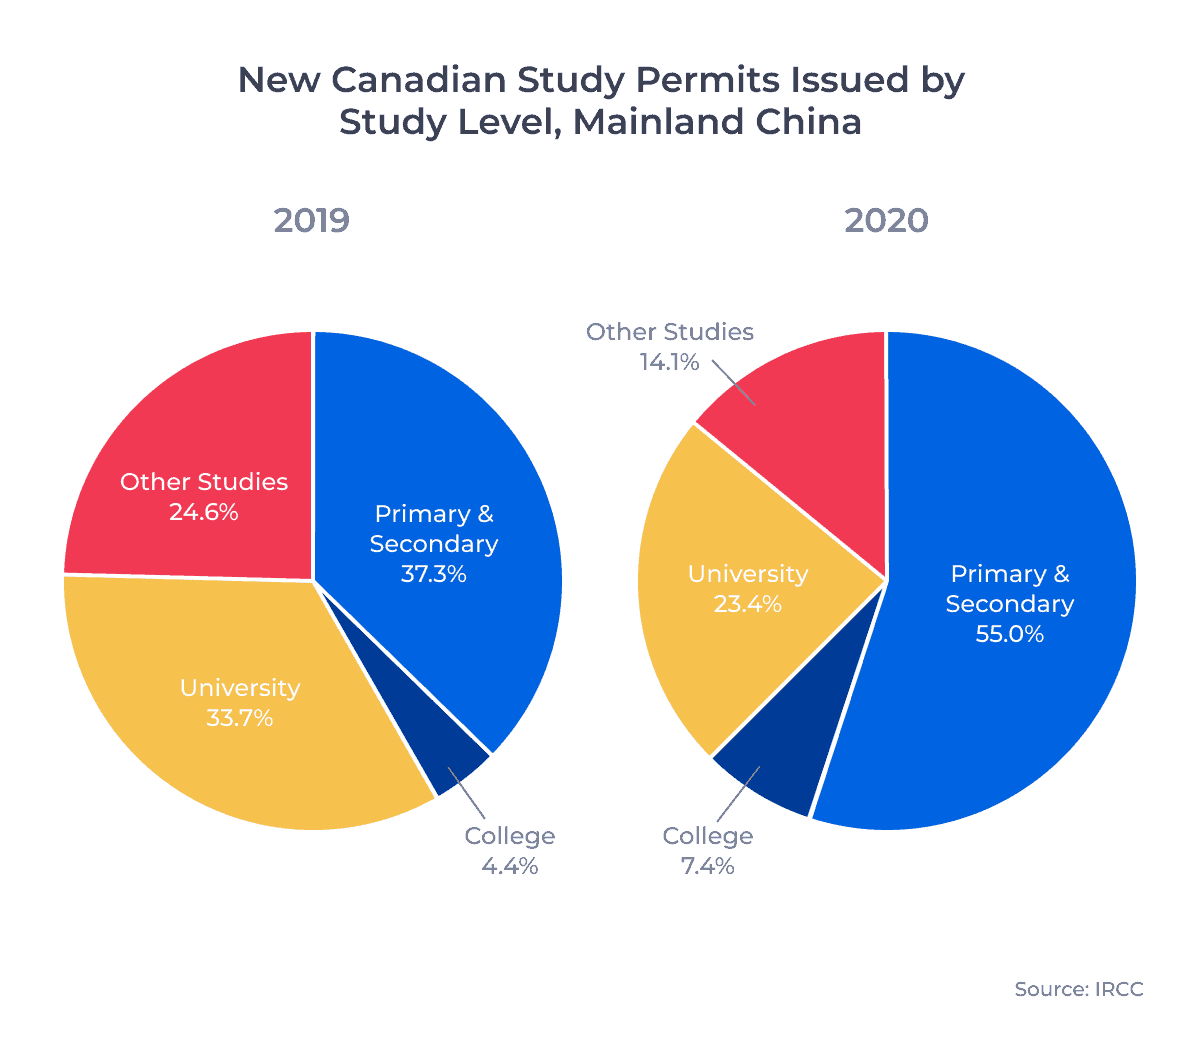 Two circle charts showing the distribution by study level of new Canadian study permits issued to residents of Mainland China in 2019 and 2020. Examined in detail below.